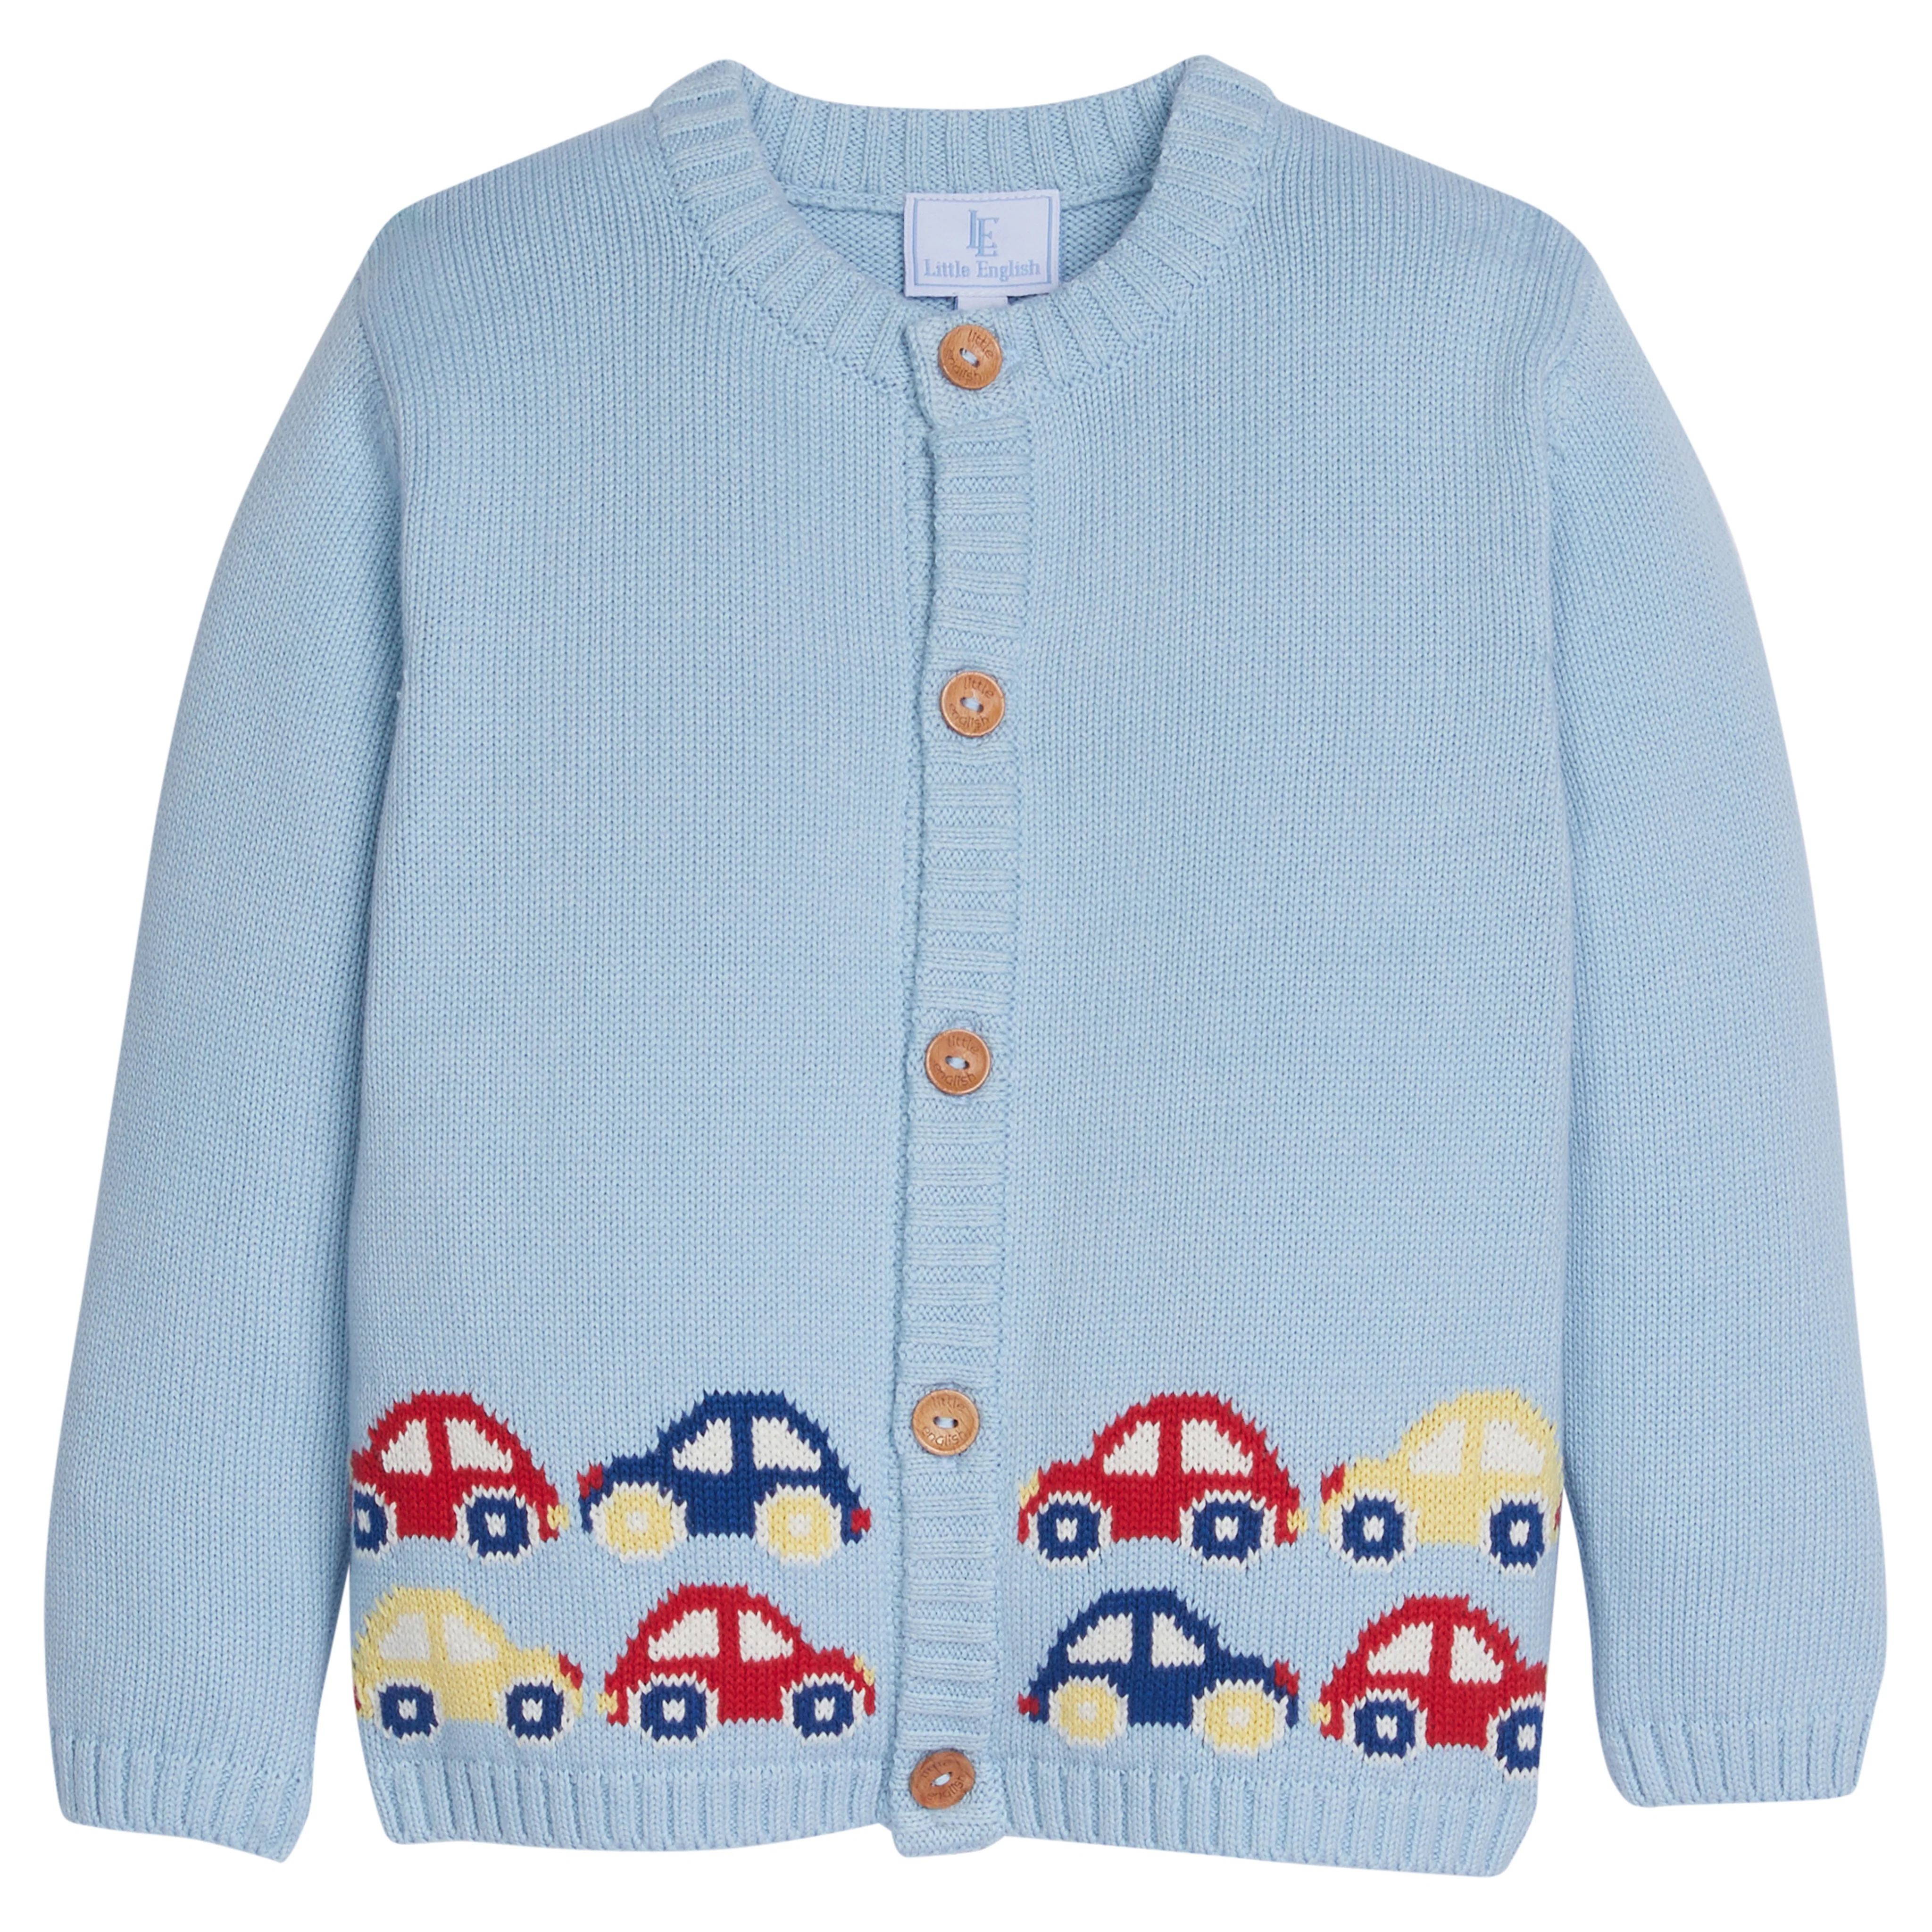 Stacked Cars Cardigan - Baby Boy's Soft Sweater | Little English